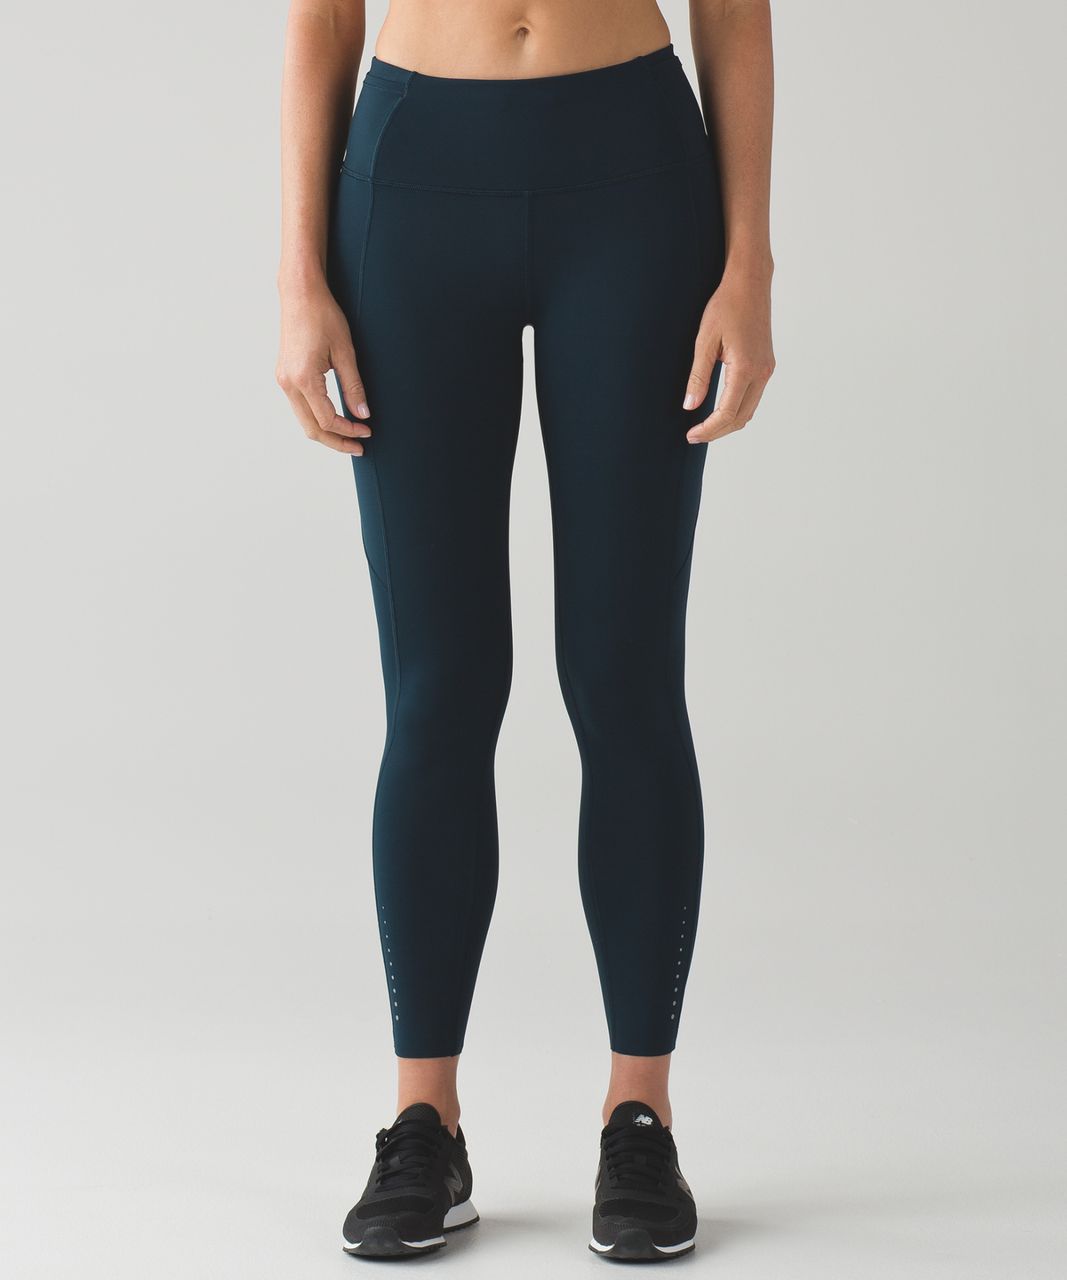 Lululemon Fast And Free 7/8 Tight - Nocturnal Teal